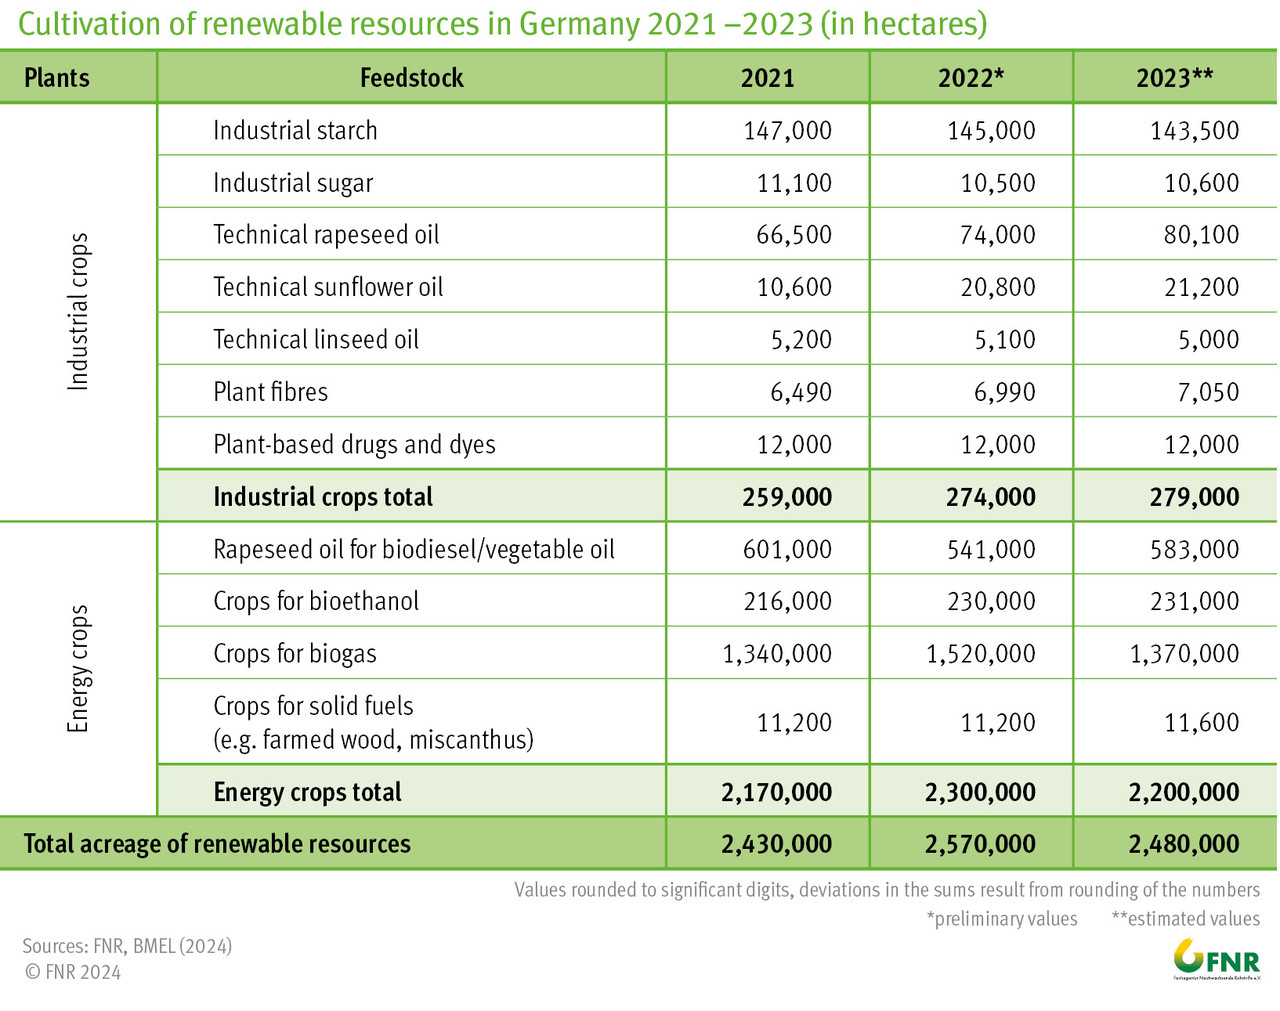 Cultivation of renewable resources in Germany (in hectares)